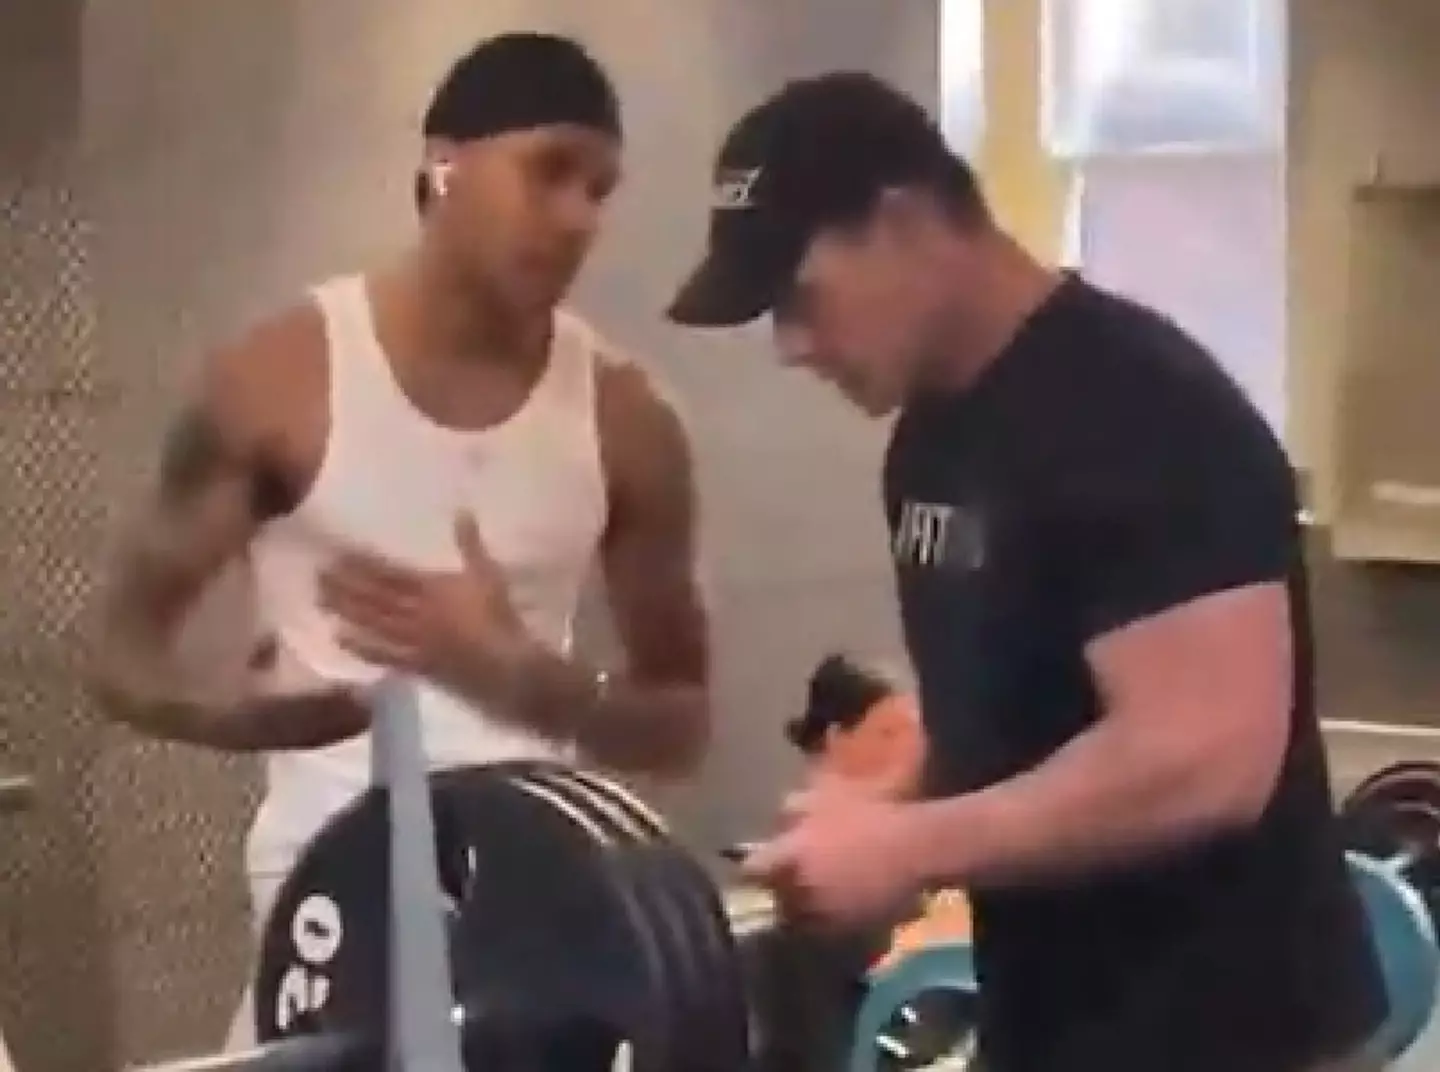 John Cena was spotted at a gym in Liverpool.